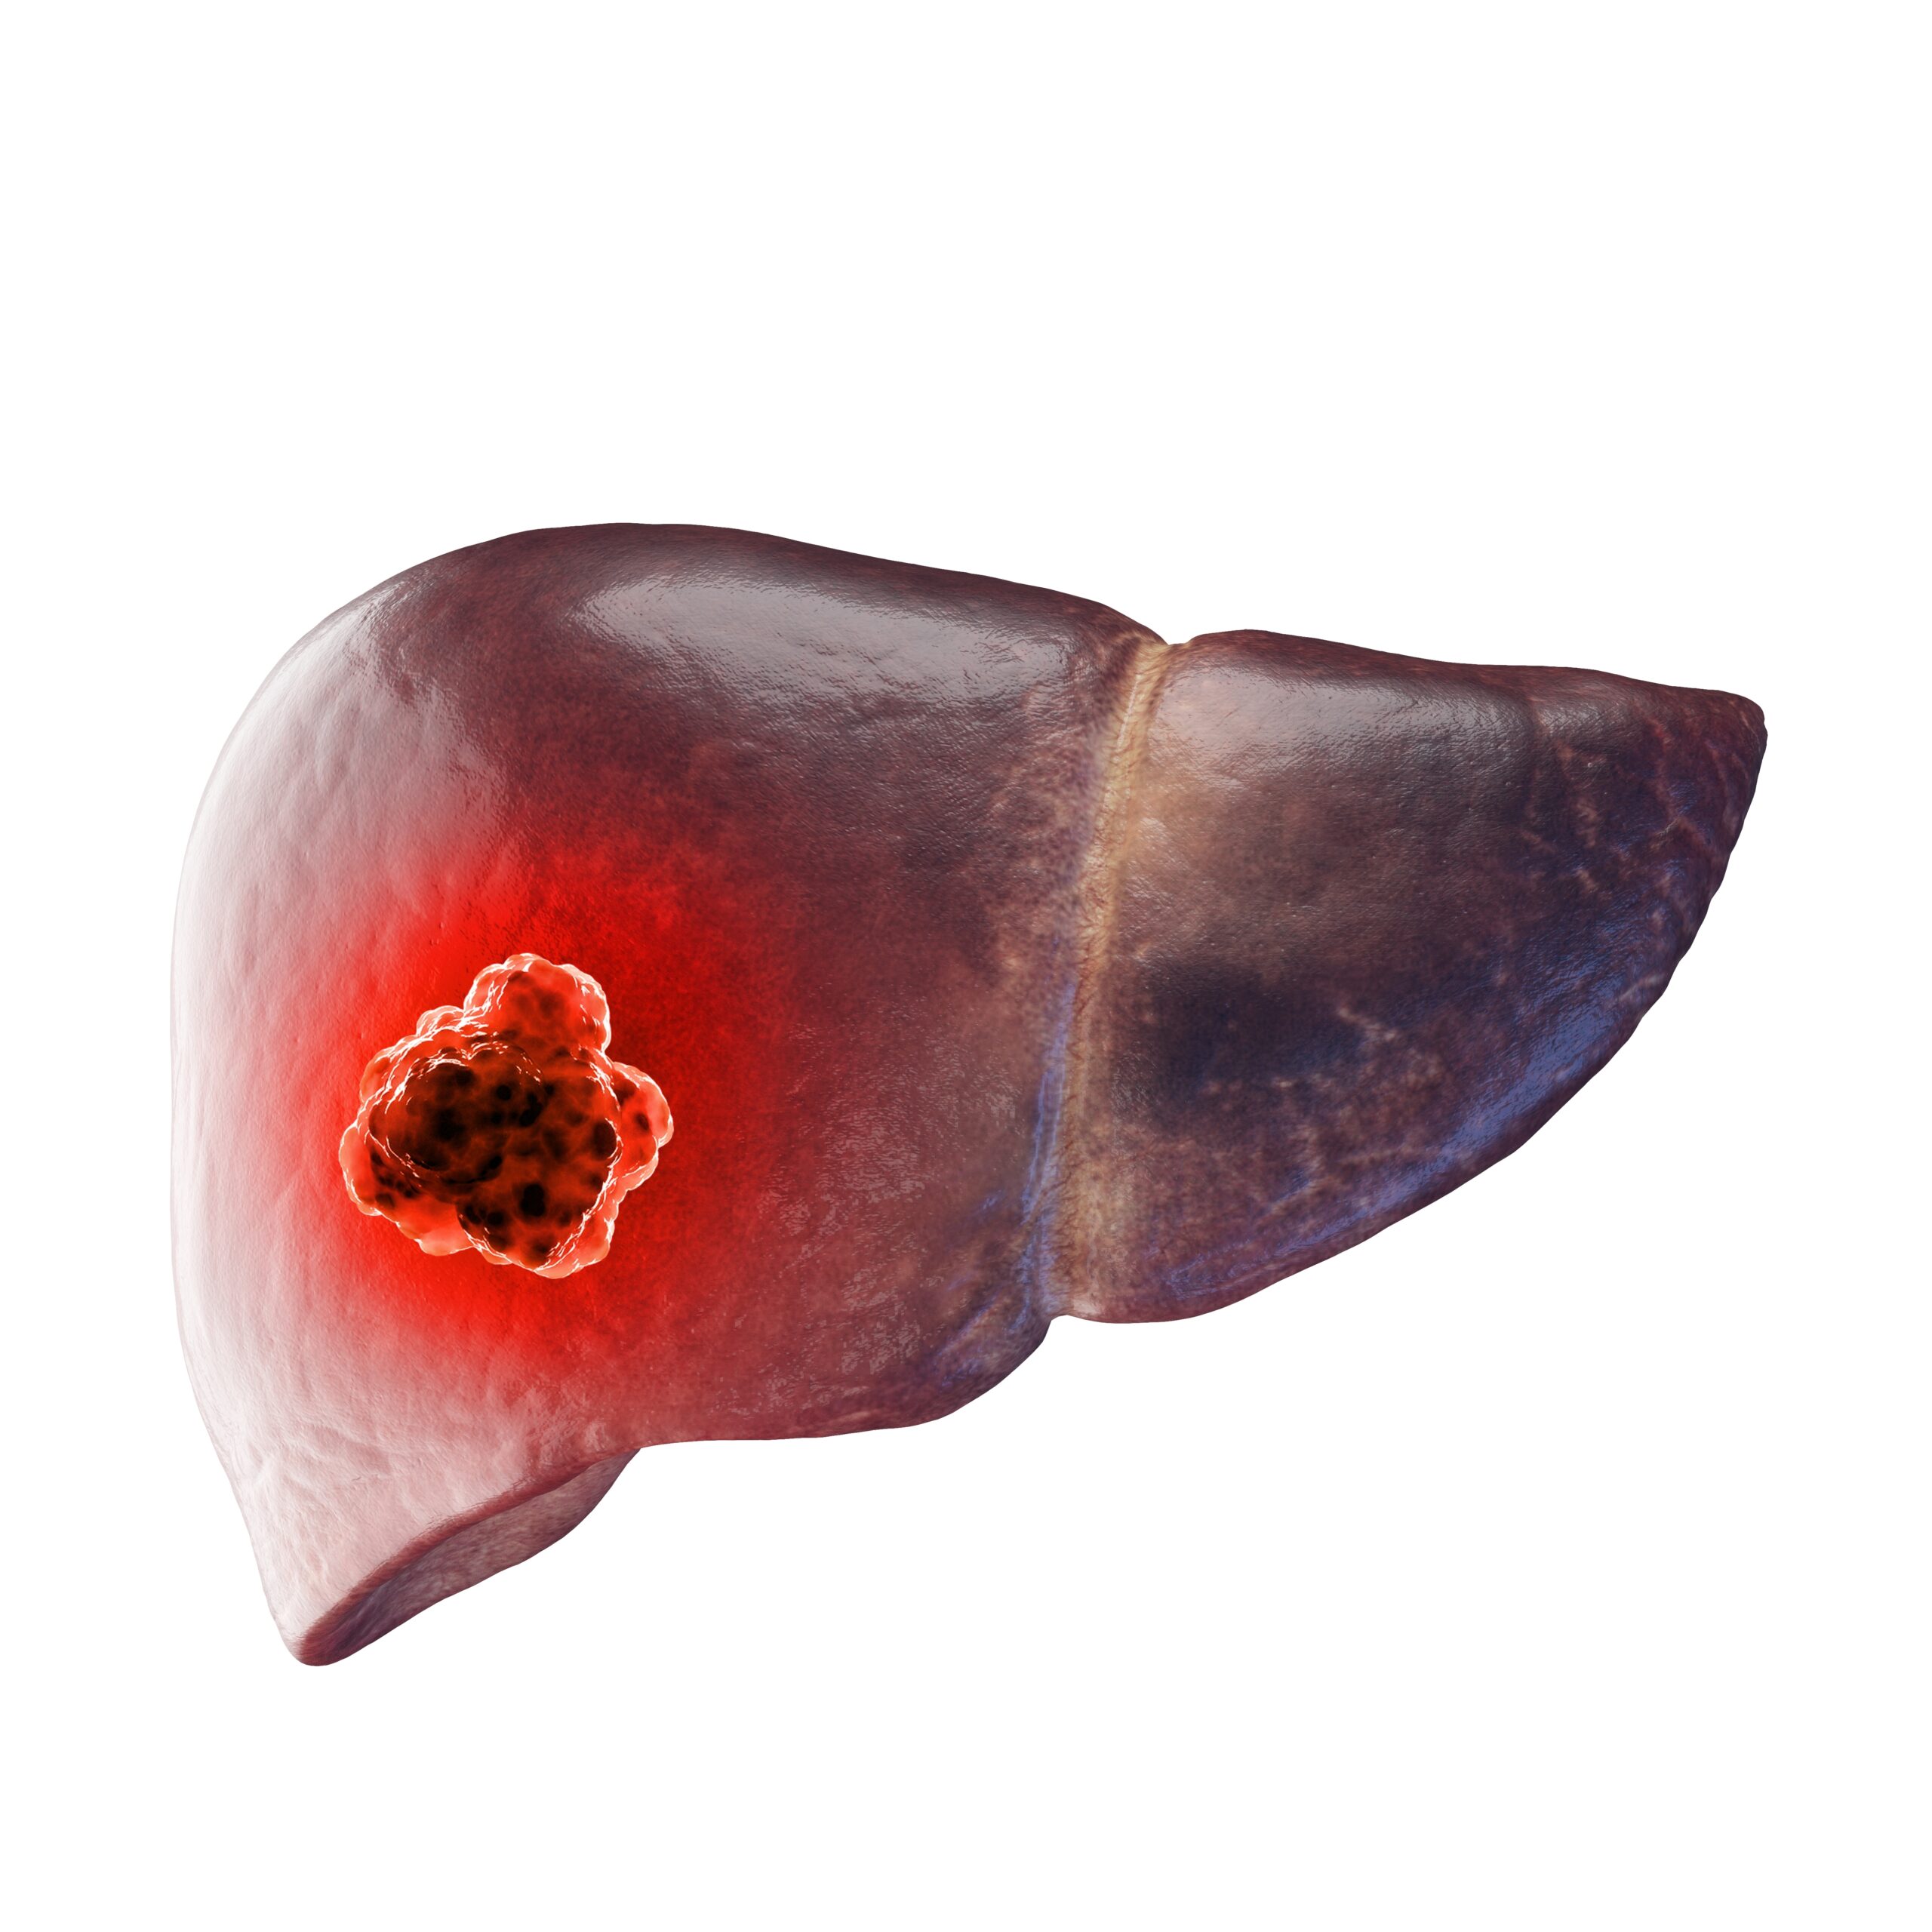 Liver Cancer: What Is, Causes, Symptoms, Diagnosis, and Prevention